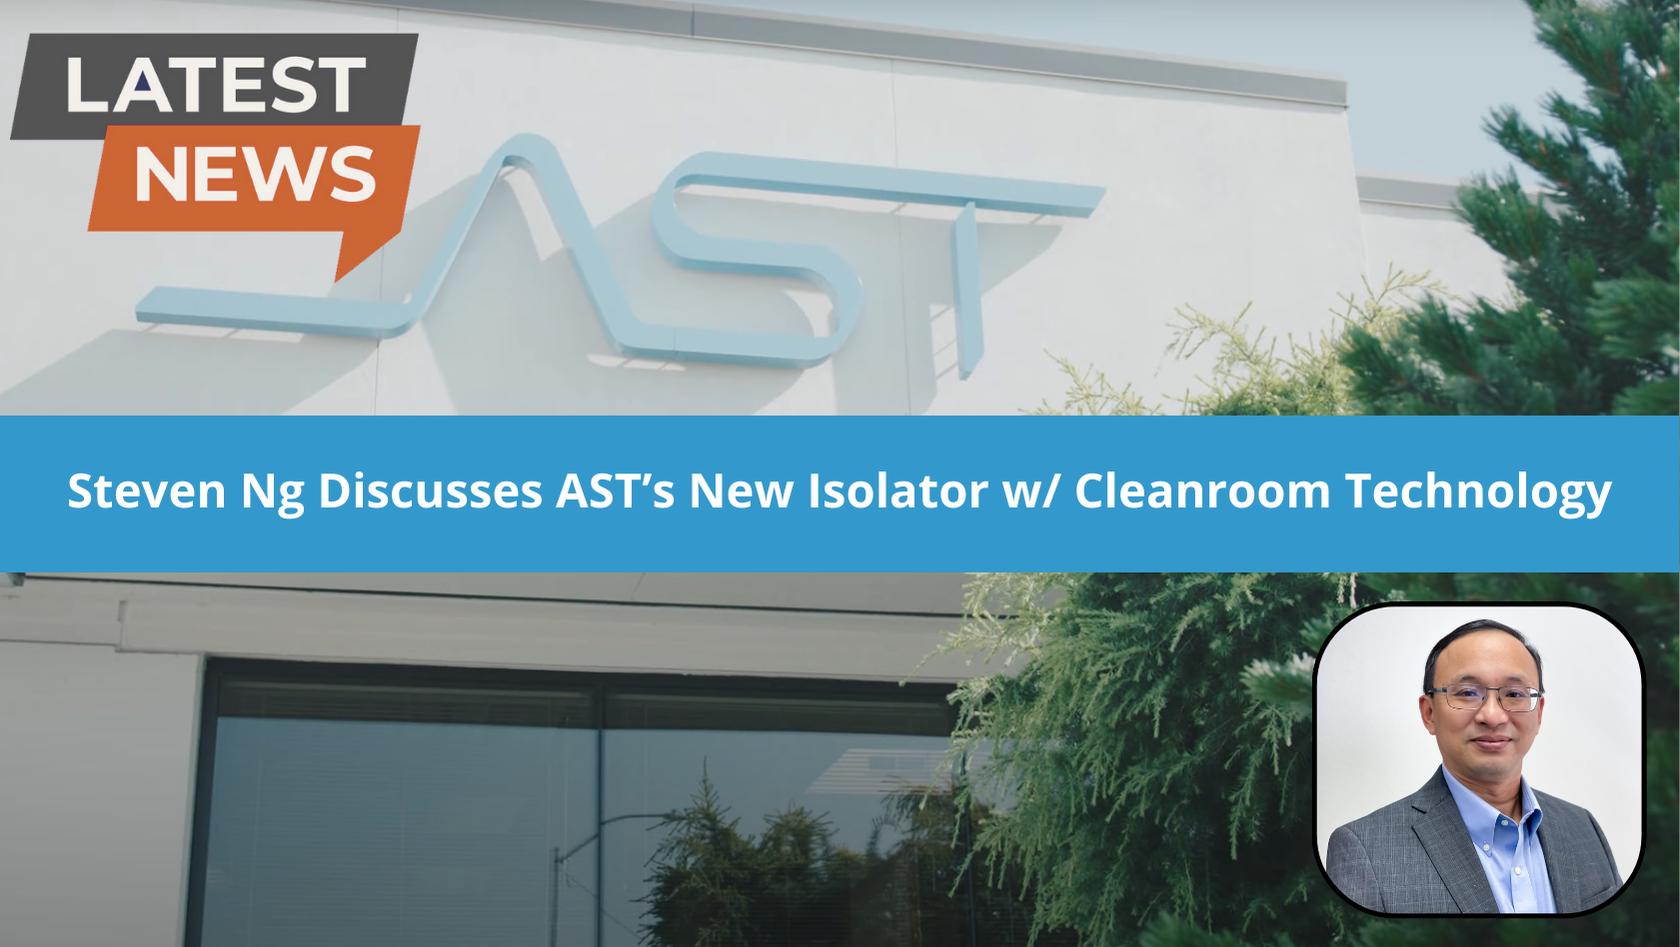 Steven Ng Discusses AST’s New Isolator Solution with Cleanroom Technology